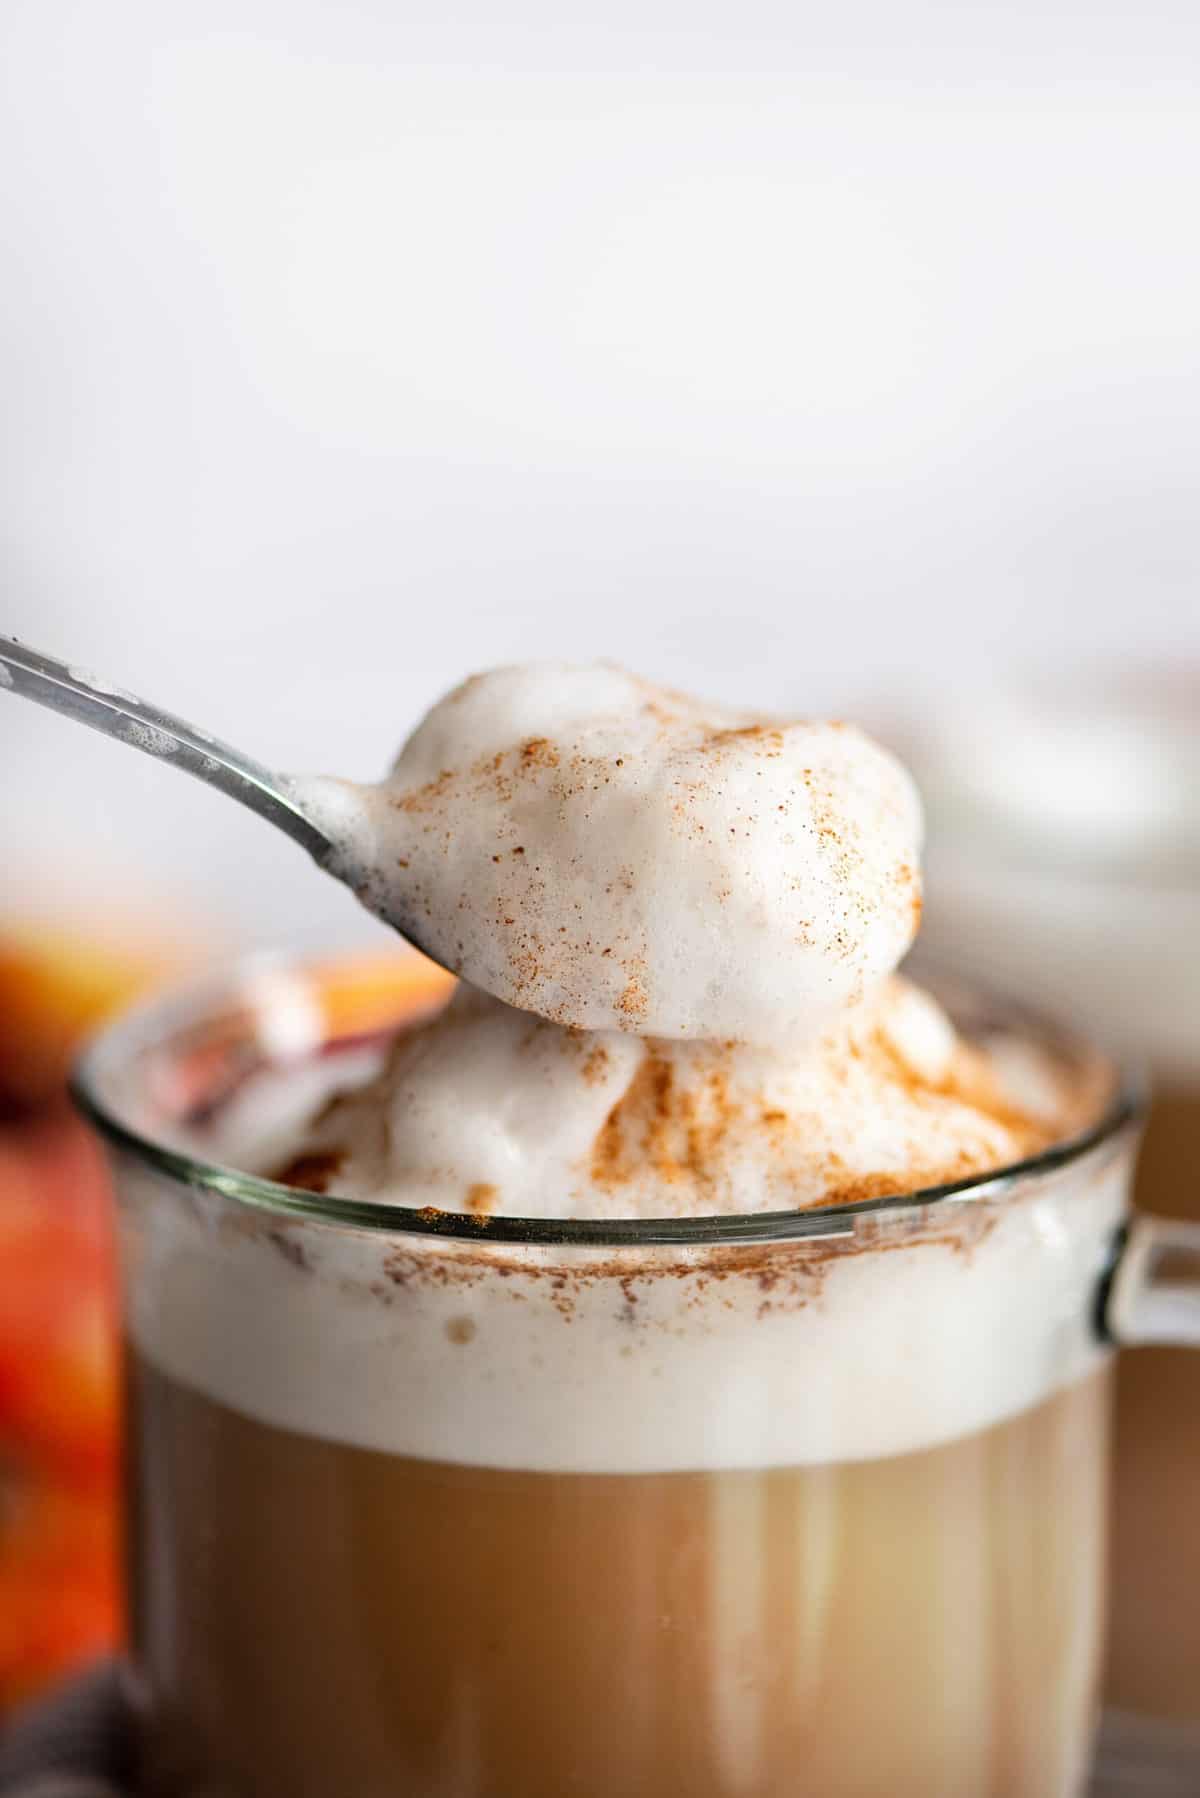 Spoonful of froth on top of sugar-free pumpkin spice latte.